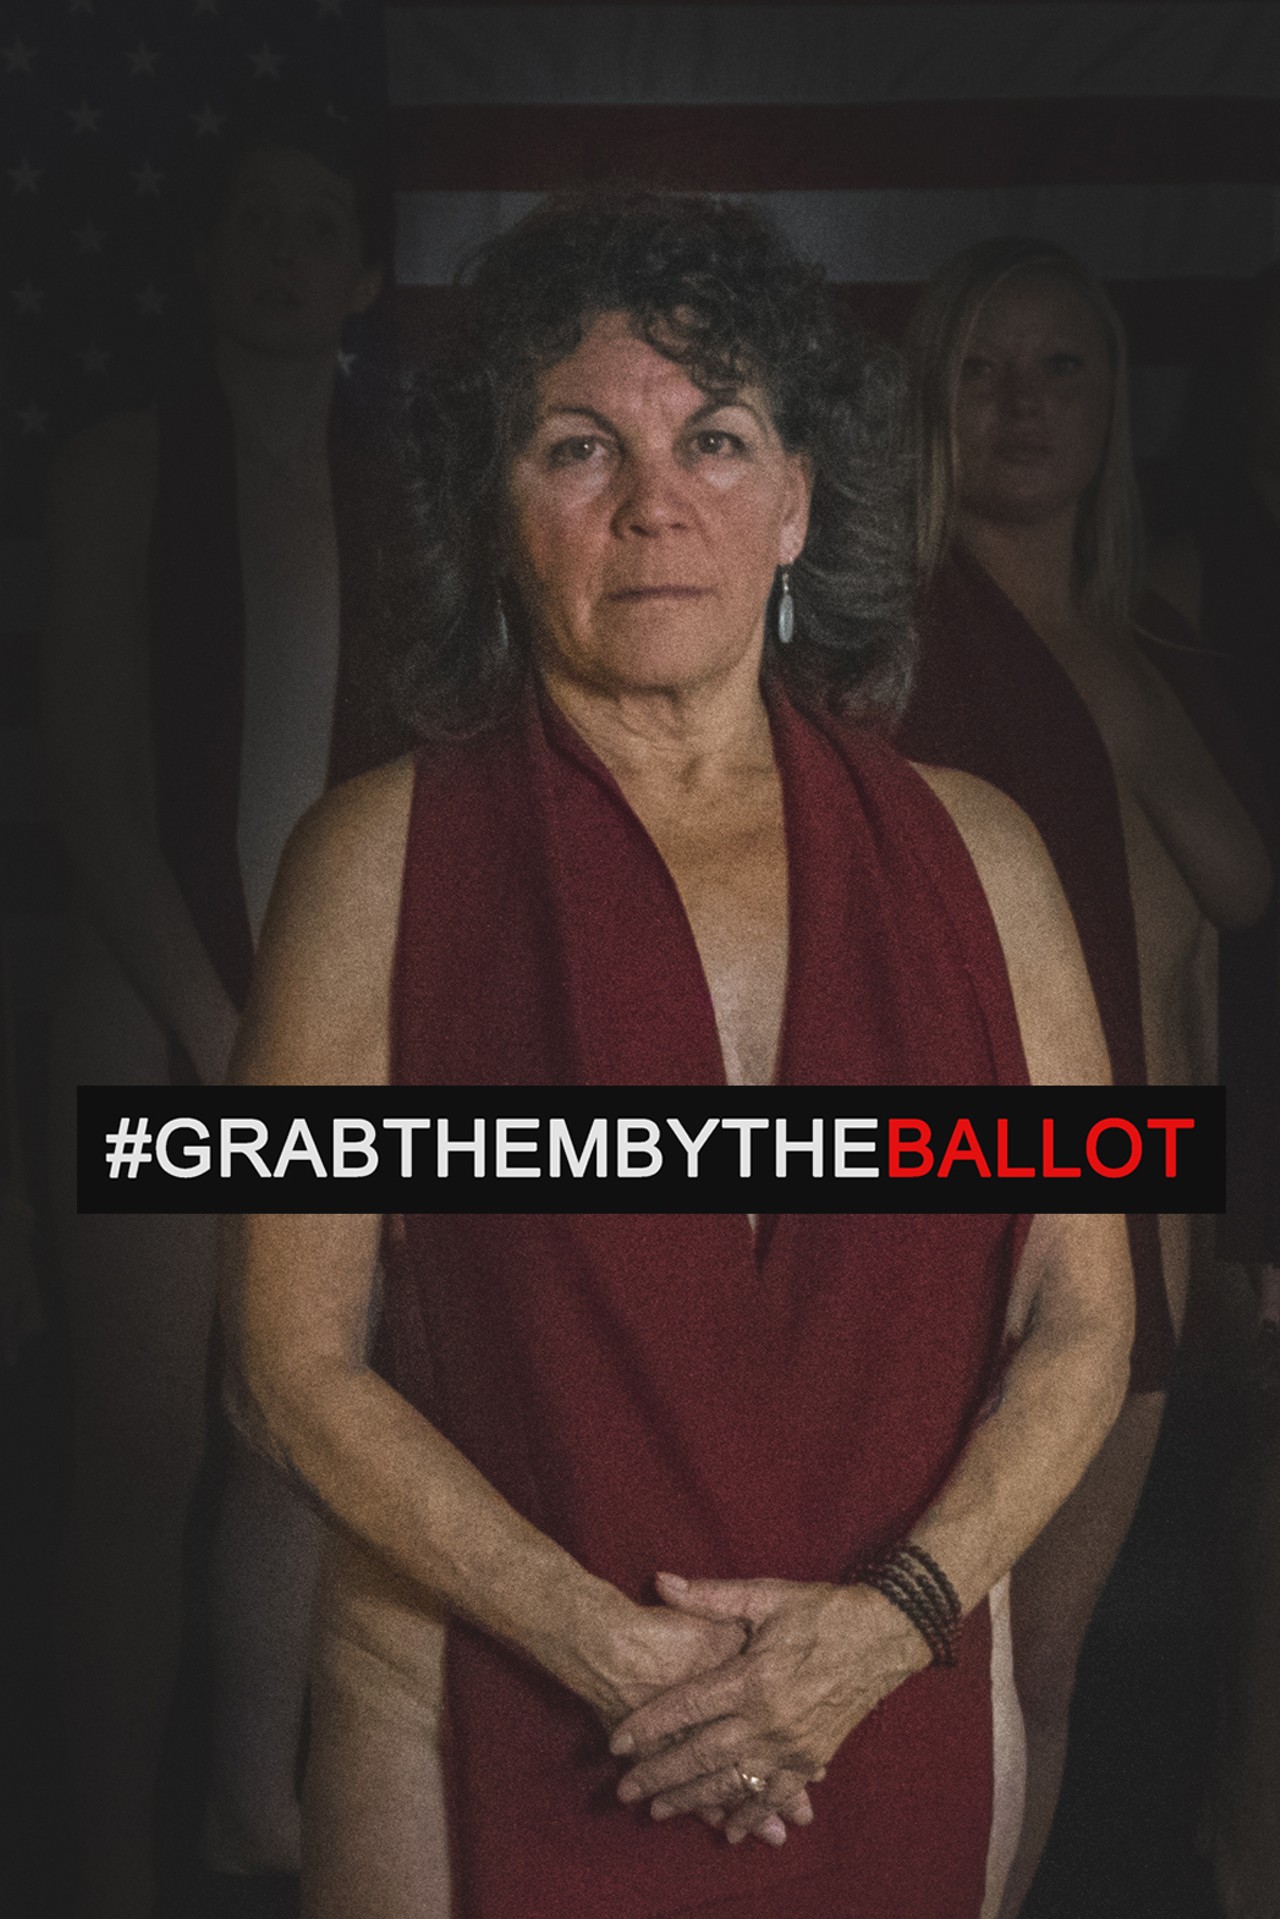 Women Pose Naked in "Grab Them By The Ballot" Campaign to Get People to Vote